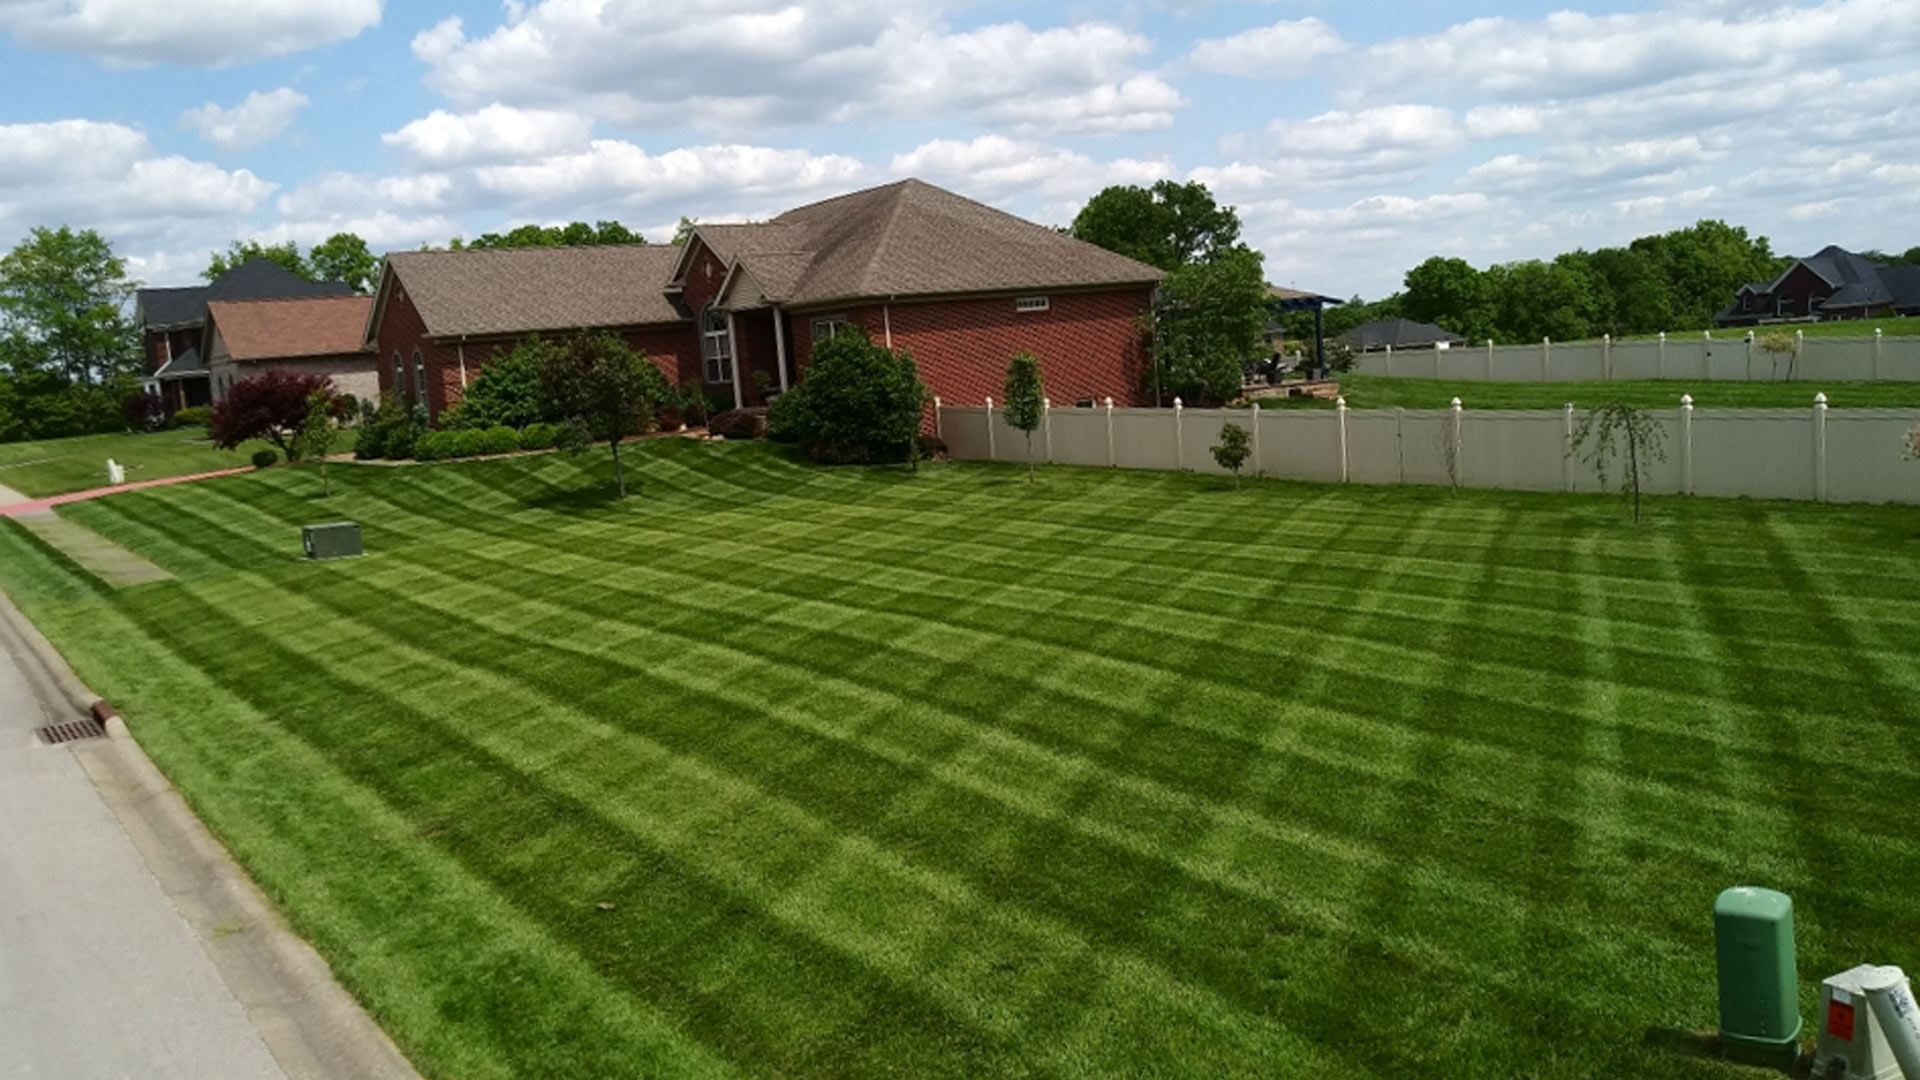 Square lawn patterns after mowing service in Shively, KY.